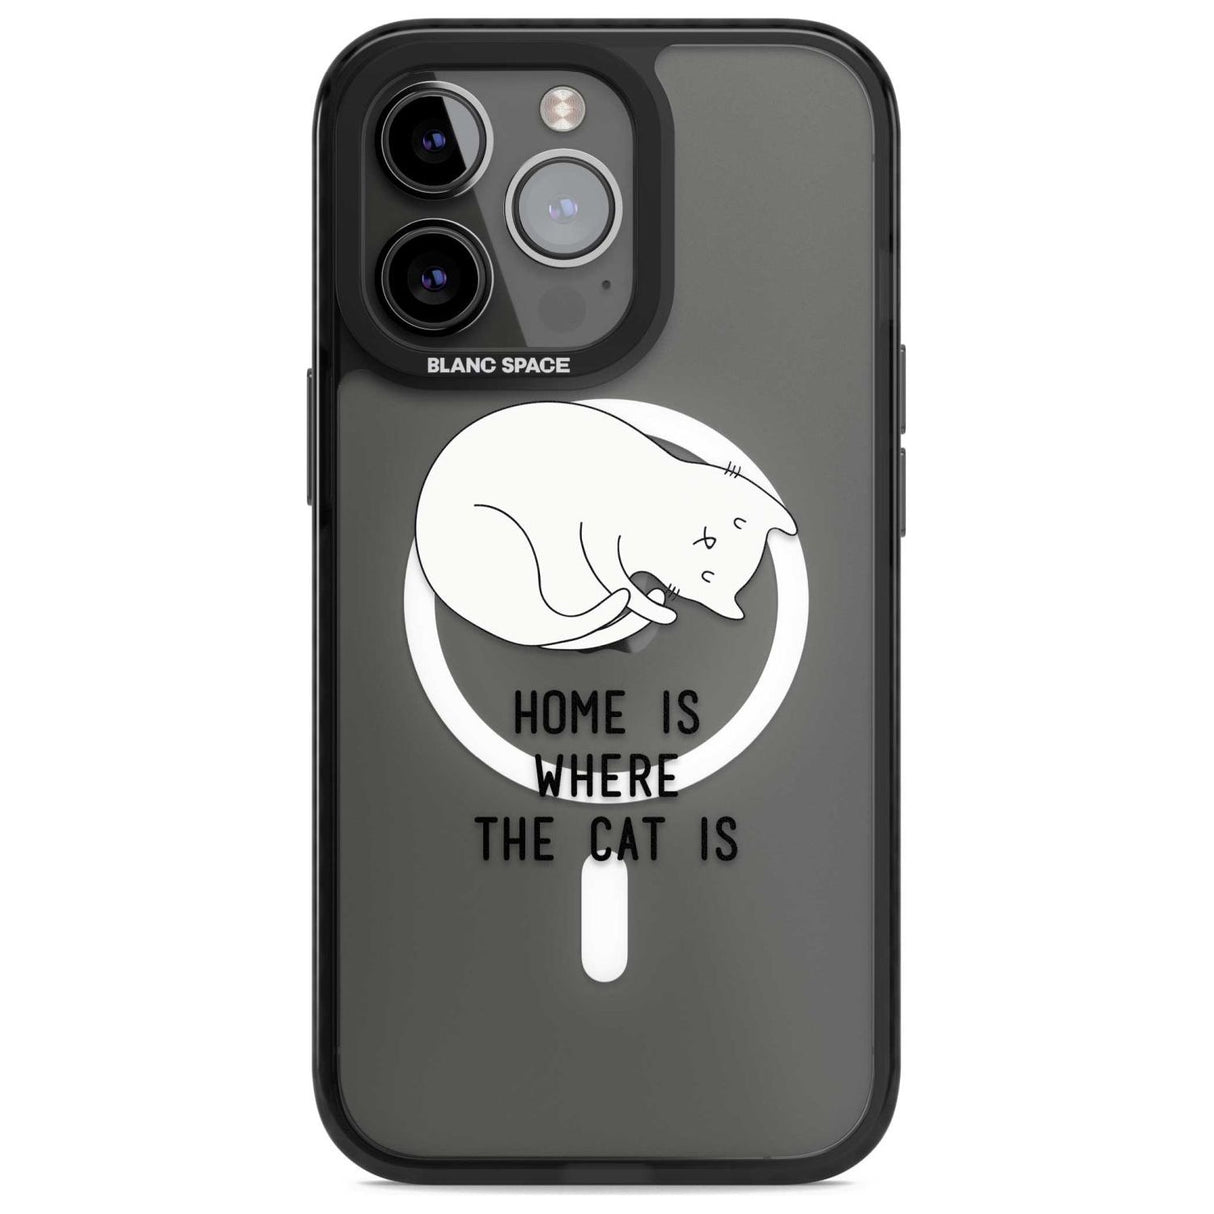 Home Is Where the Cat is Phone Case iPhone 15 Pro Max / Magsafe Black Impact Case,iPhone 15 Pro / Magsafe Black Impact Case,iPhone 14 Pro Max / Magsafe Black Impact Case,iPhone 14 Pro / Magsafe Black Impact Case,iPhone 13 Pro / Magsafe Black Impact Case Blanc Space